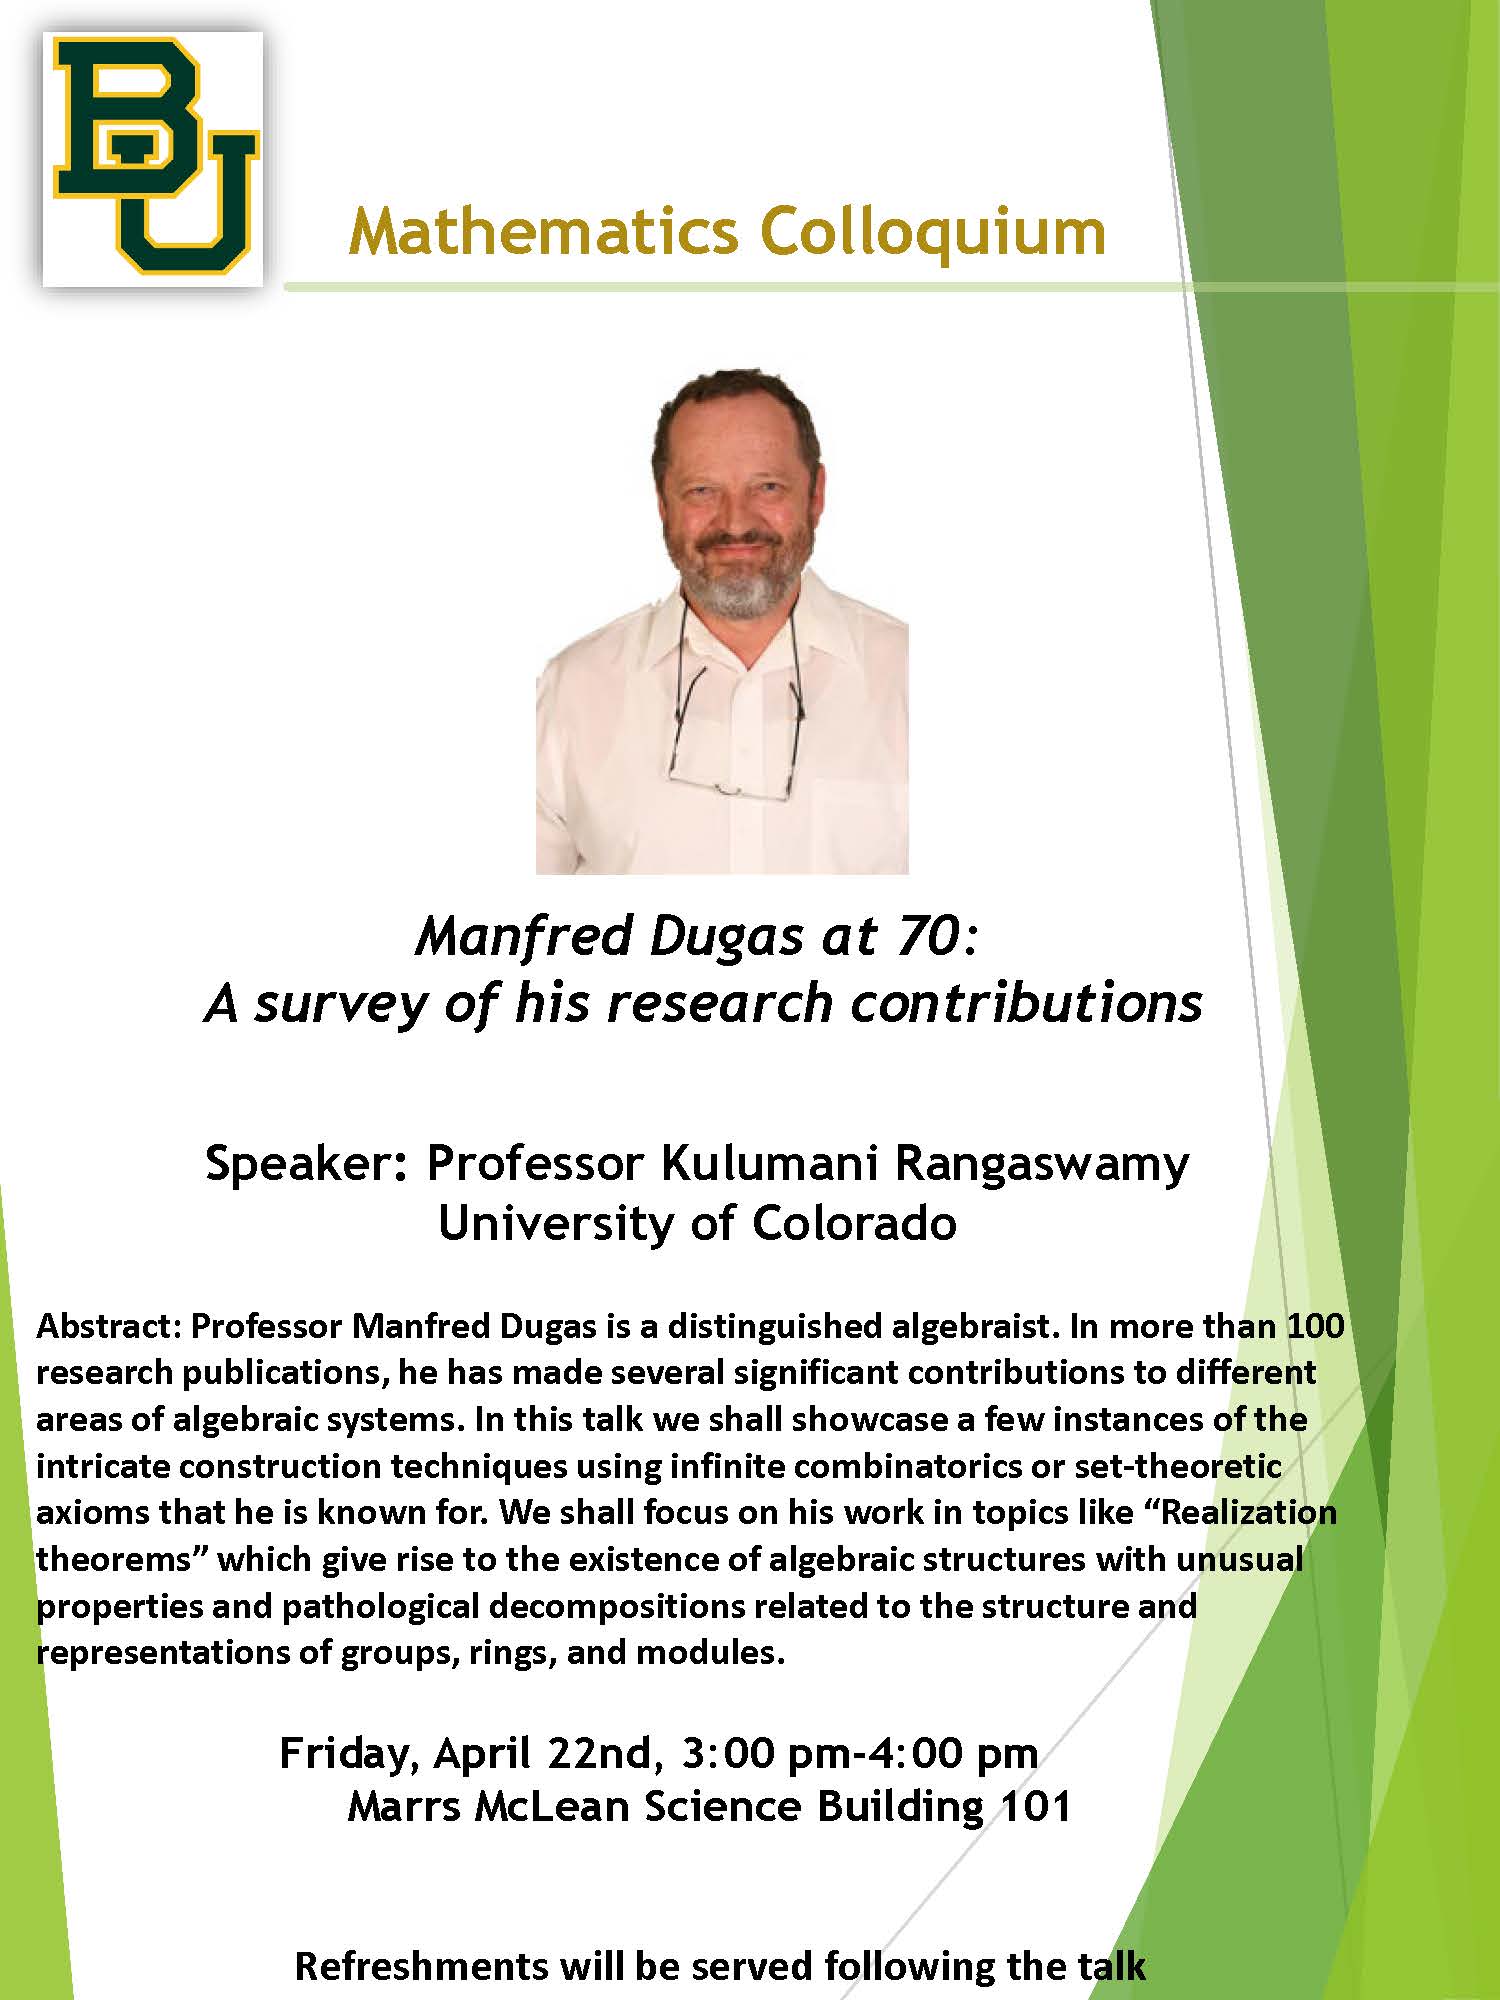 Dr. Manfred Dugas' 70th Birthday Colloquium Flyer